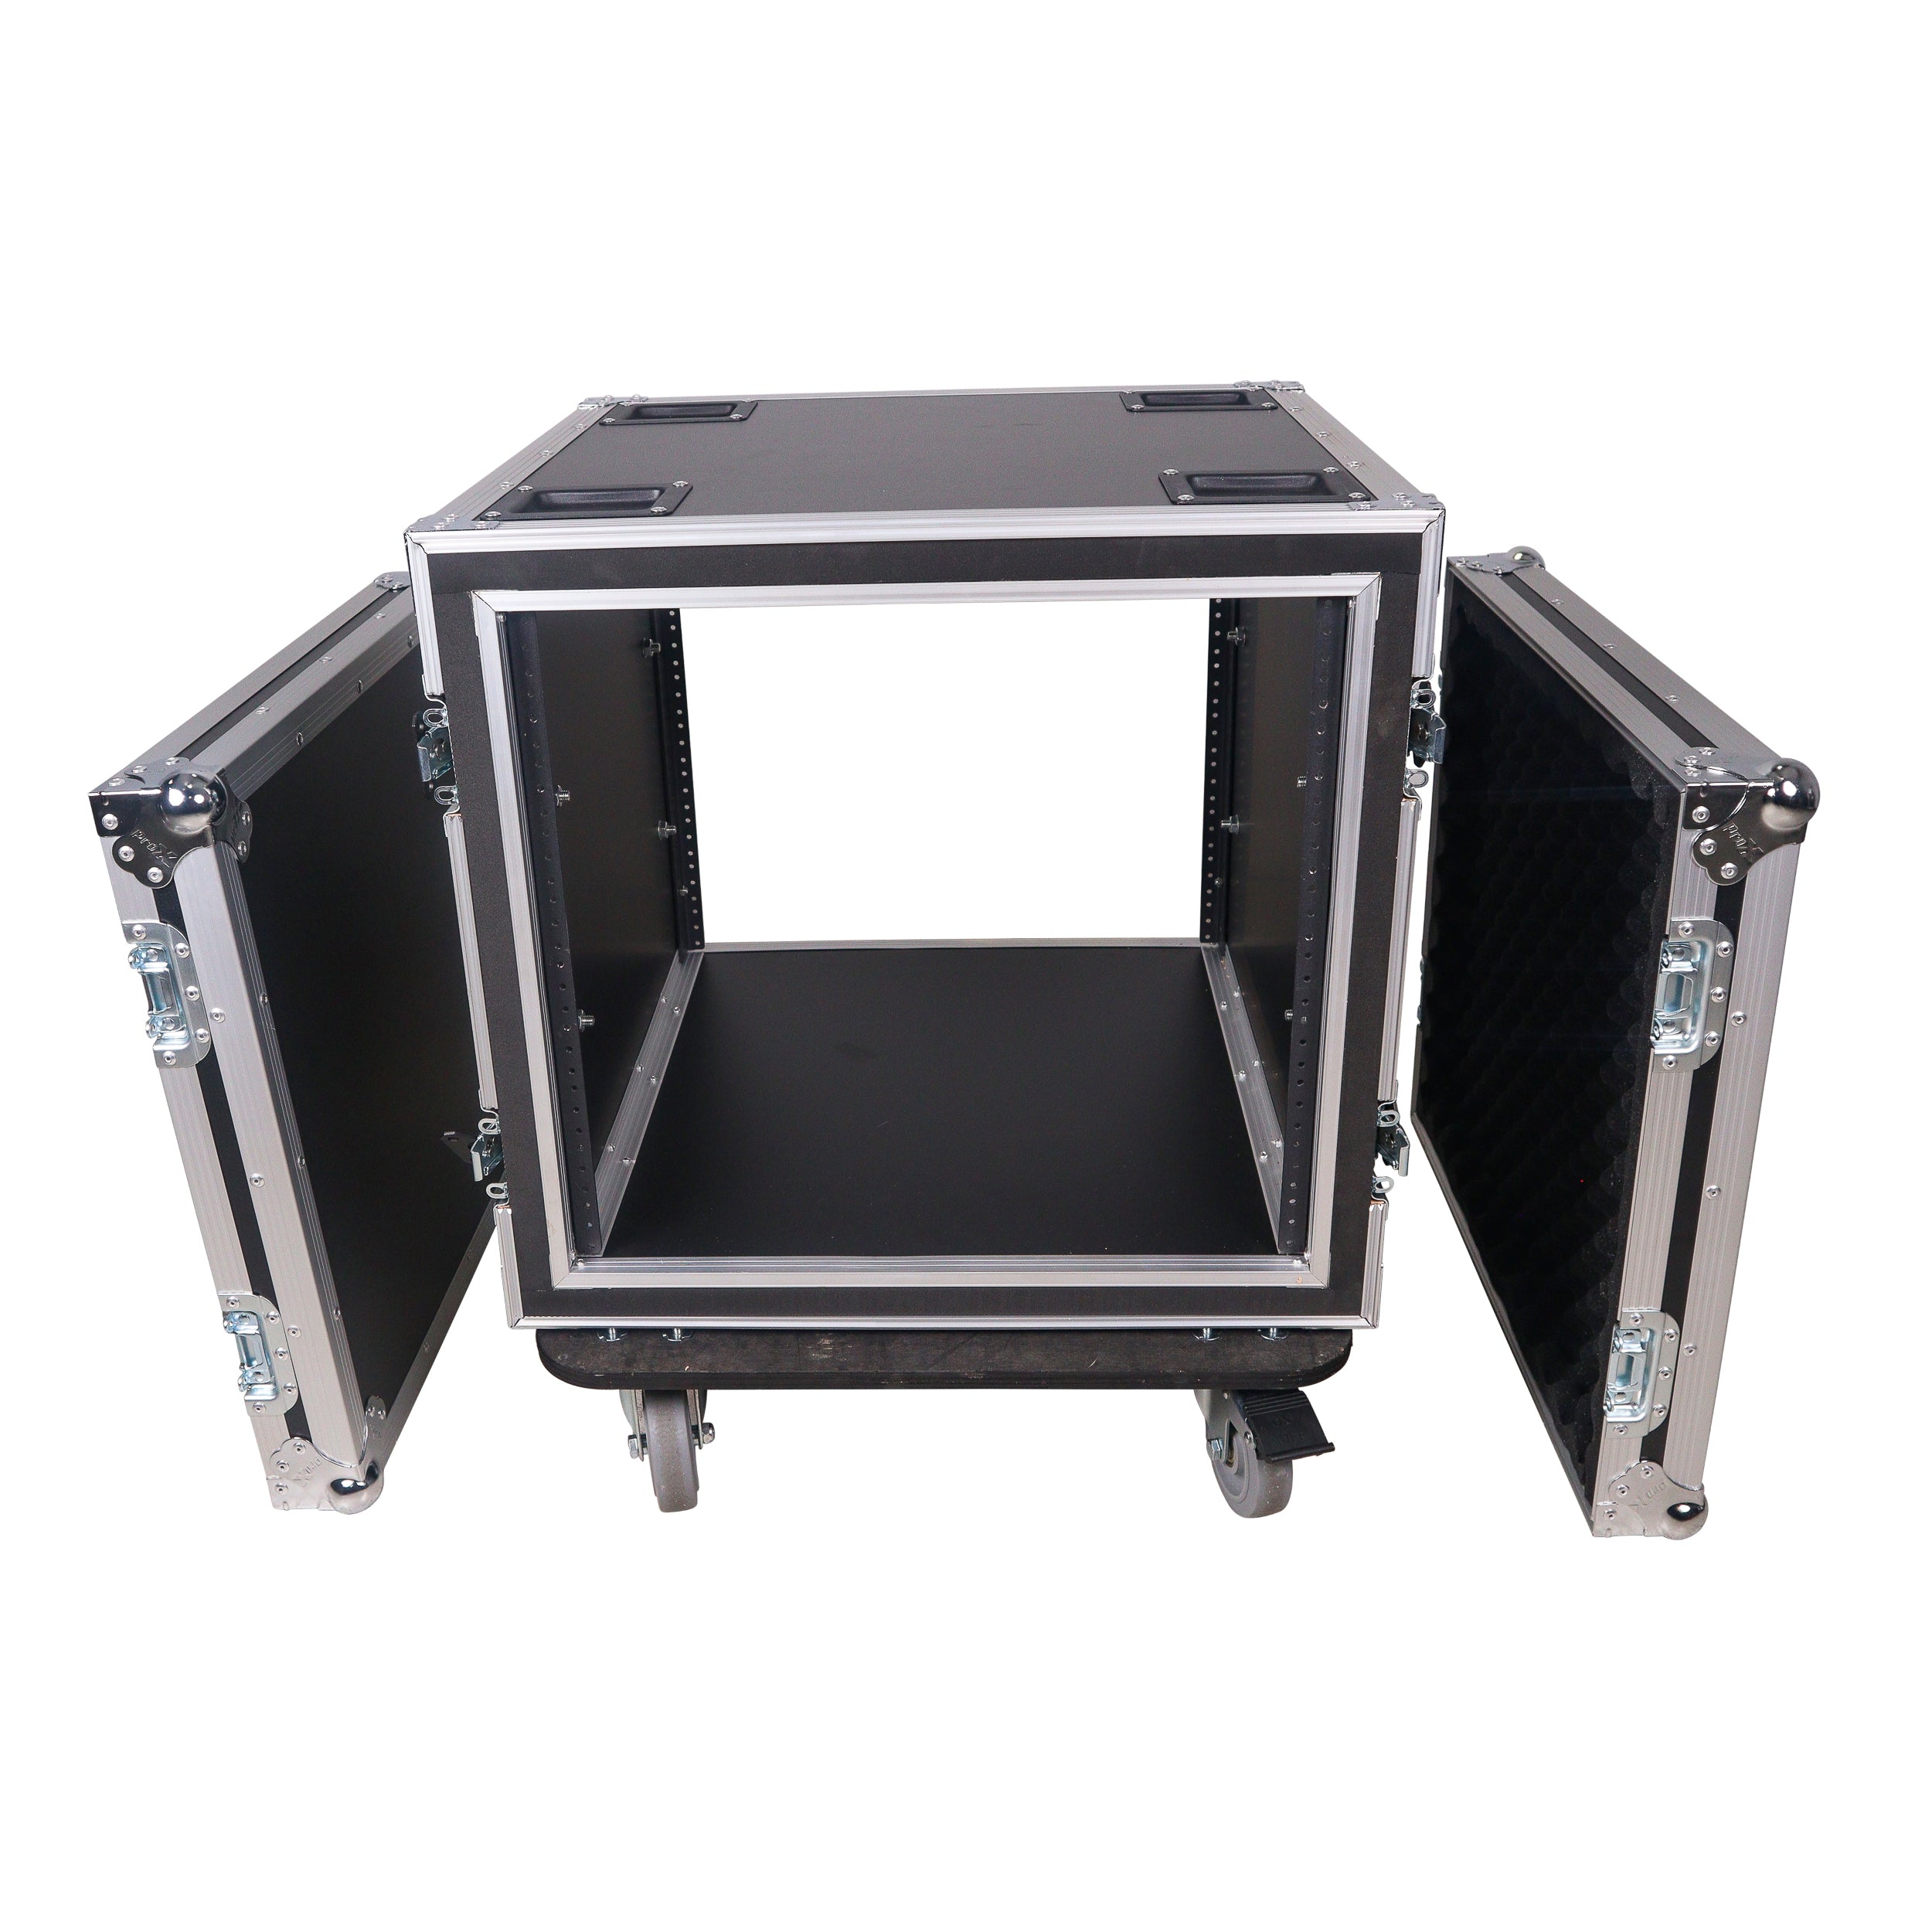 Pro X ATA Style Space Shockproof Amp Rack Mount Case 20 inch Depth with Caster Wheels T-10RSP